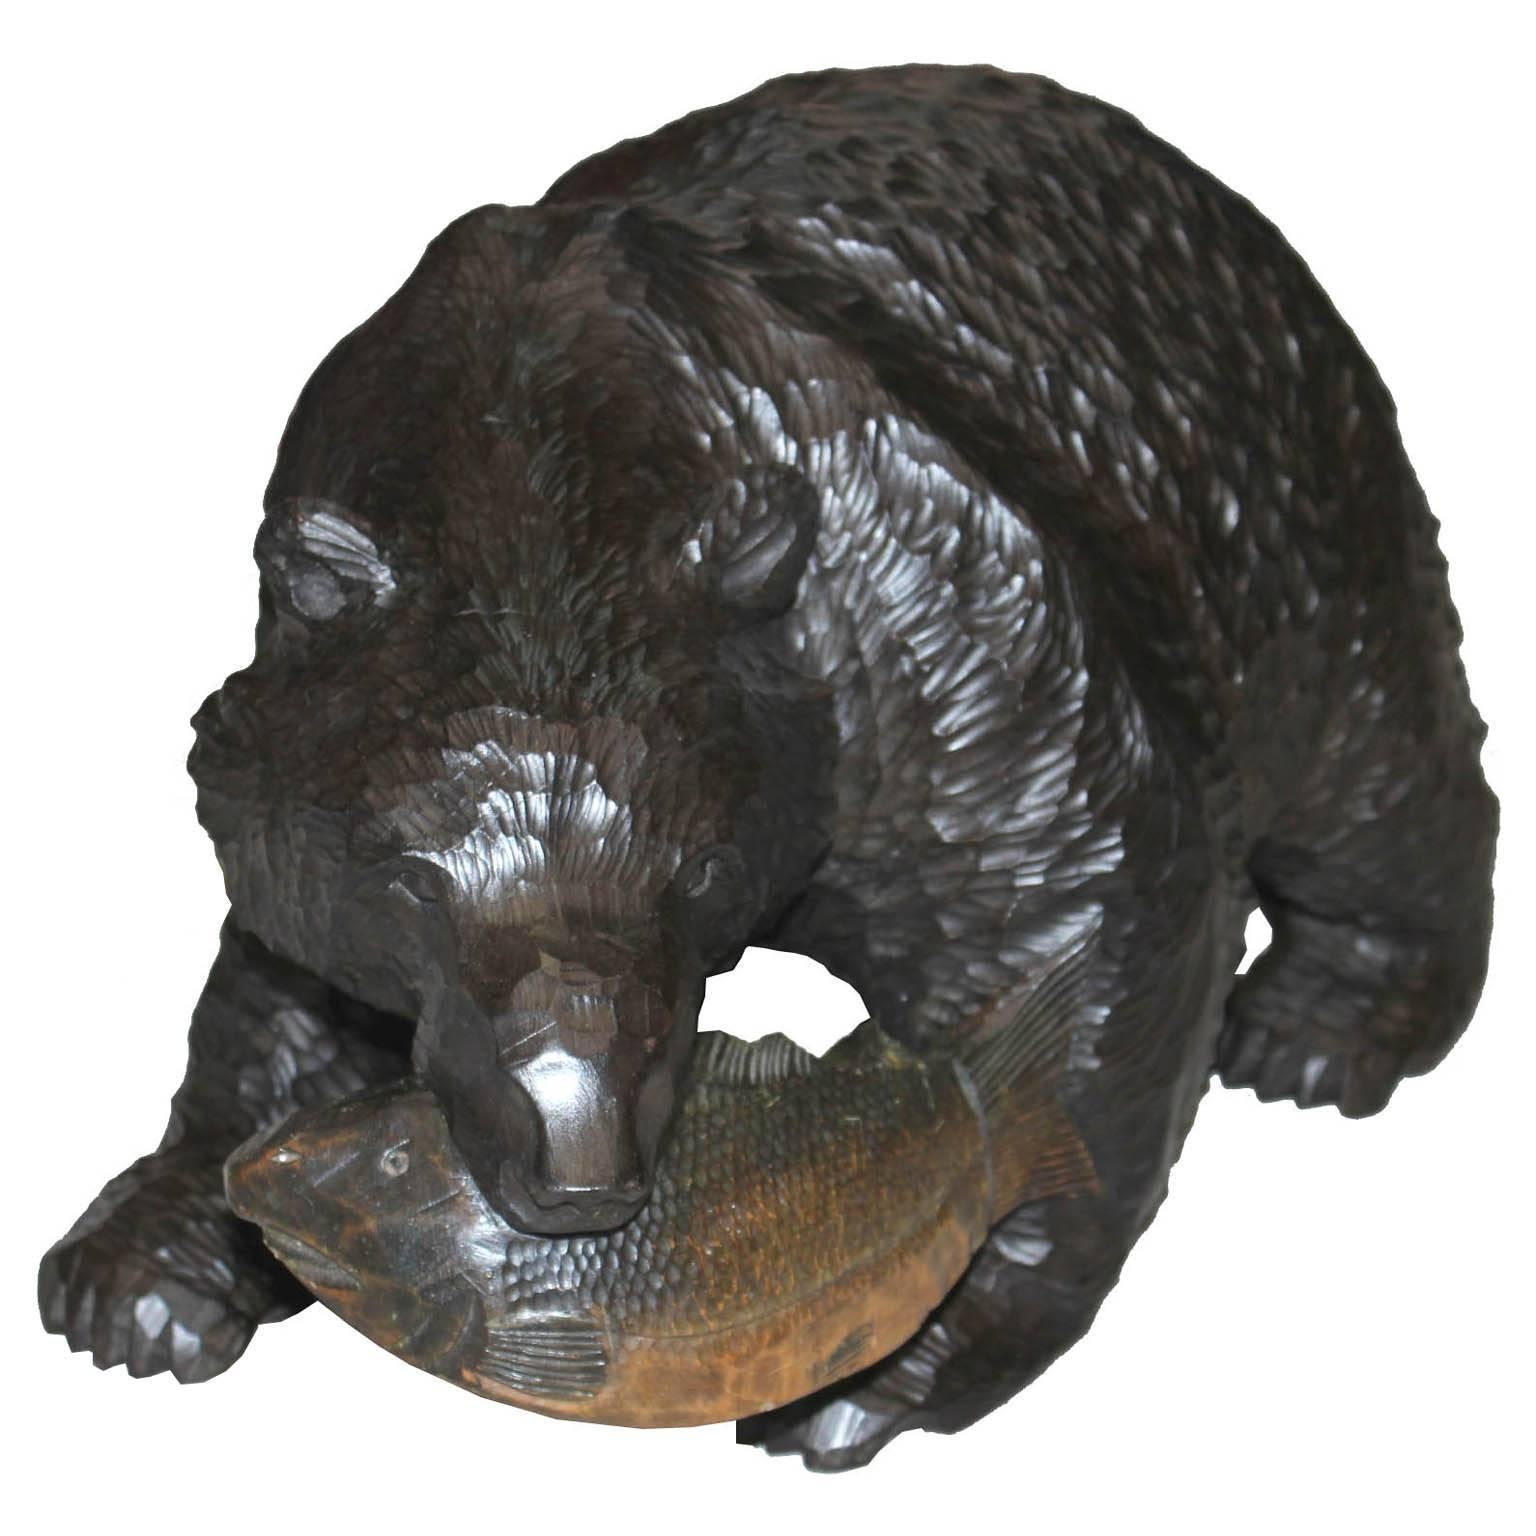 Vintage Japanese carved wood bear carrying a salmon in his mouth. Hand-carved by the Ainu (indigenous people of Japan) from the island of Hokkaido. Taisho period, circa 1920s. Sugi (cedar wood).